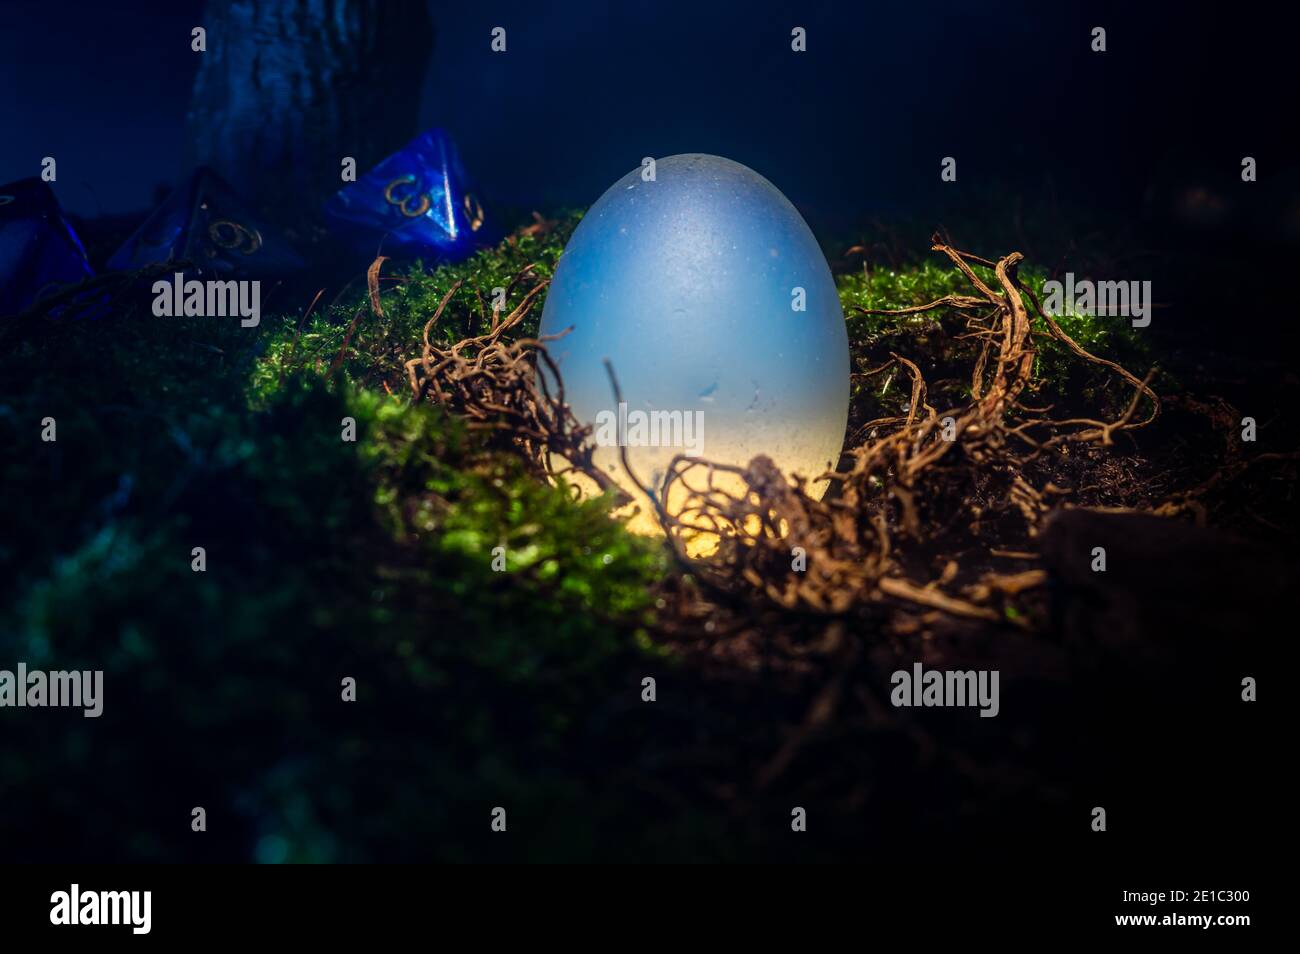 Close-up rpg scene of a white opaque egg in a nest of moss, dirt and roots. With in the background three 8 sided dice. Stock Photo